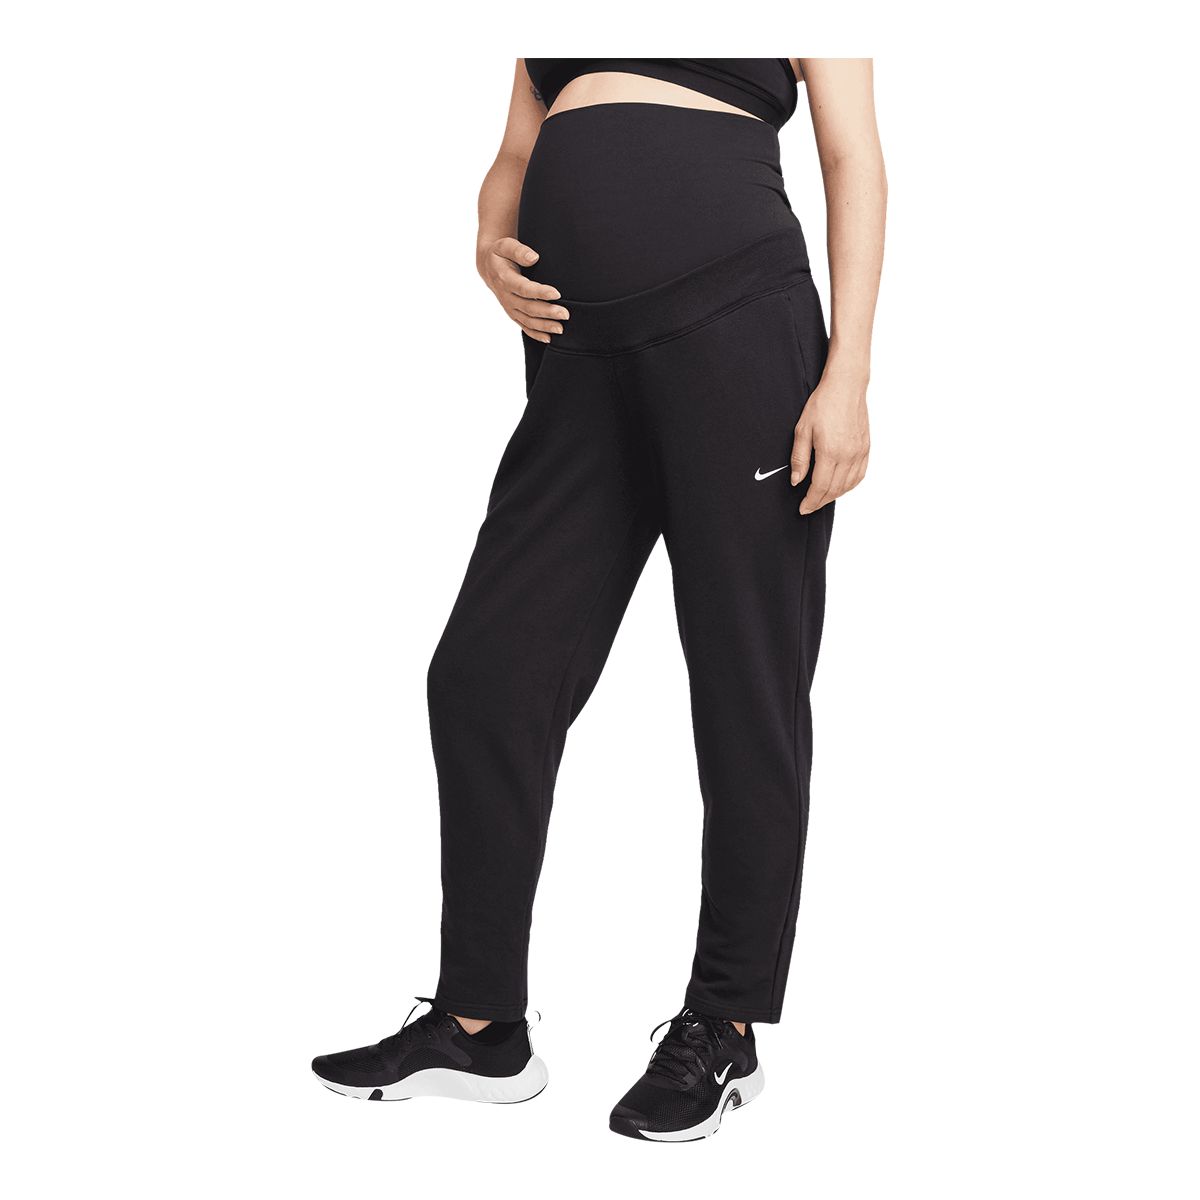 https://media-www.sportchek.ca/product/div-03-softgoods/dpt-70-athletic-clothing/sdpt-02-womens/334166746/nike-w-maternity-one-df-pant-e0f1026d-8b97-434f-8911-a5c942c866a4-jpgrendition.jpg